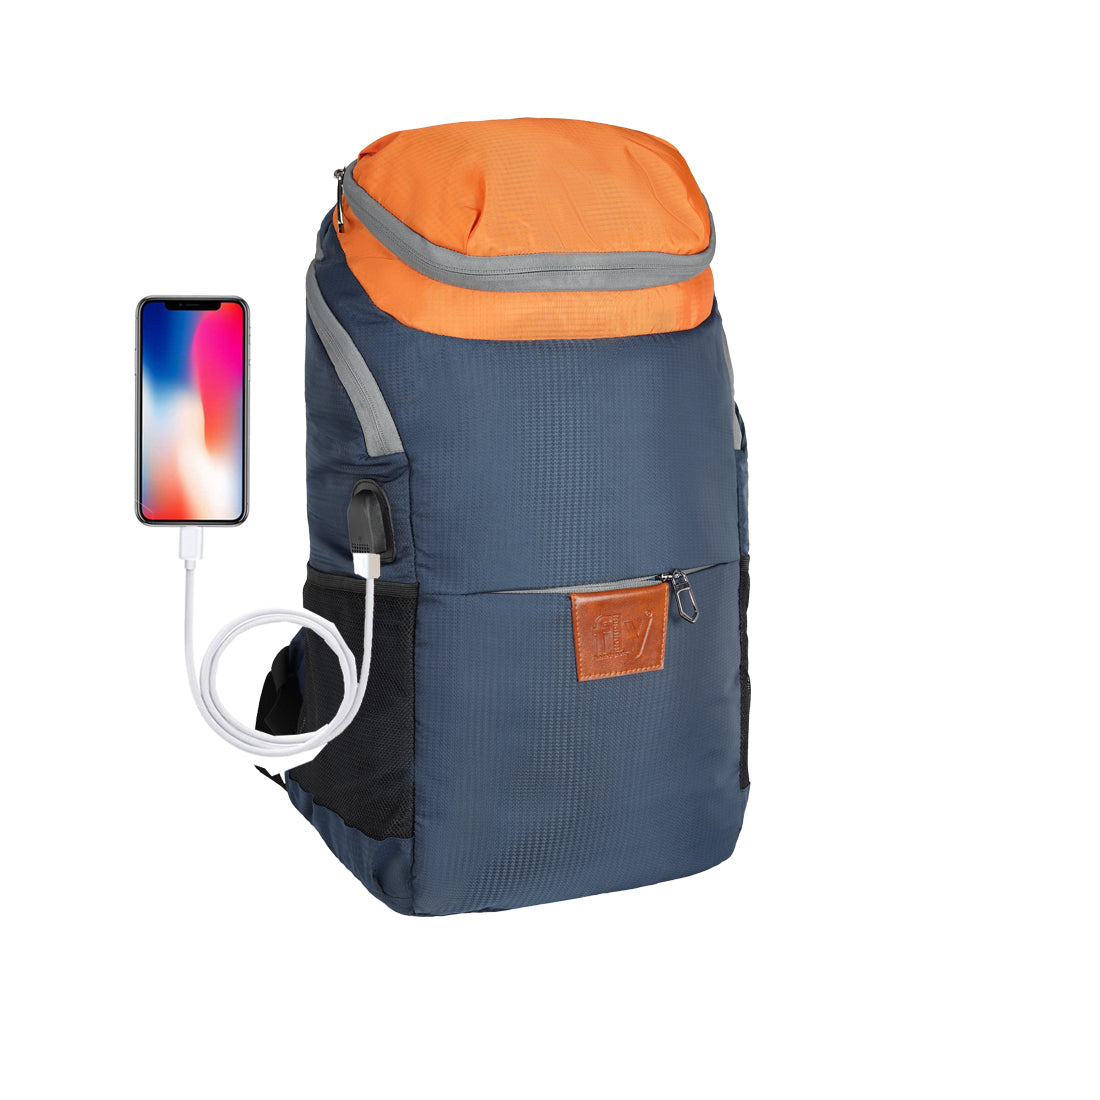 Fly Fashion 20 ltrs Polyester Multi Color Anti Theft Backpack with USB Charging Port 15.6 Inch Laptop Bagpack Waterproof Casual Unisex Bag for School College Office Suitable for Men Women